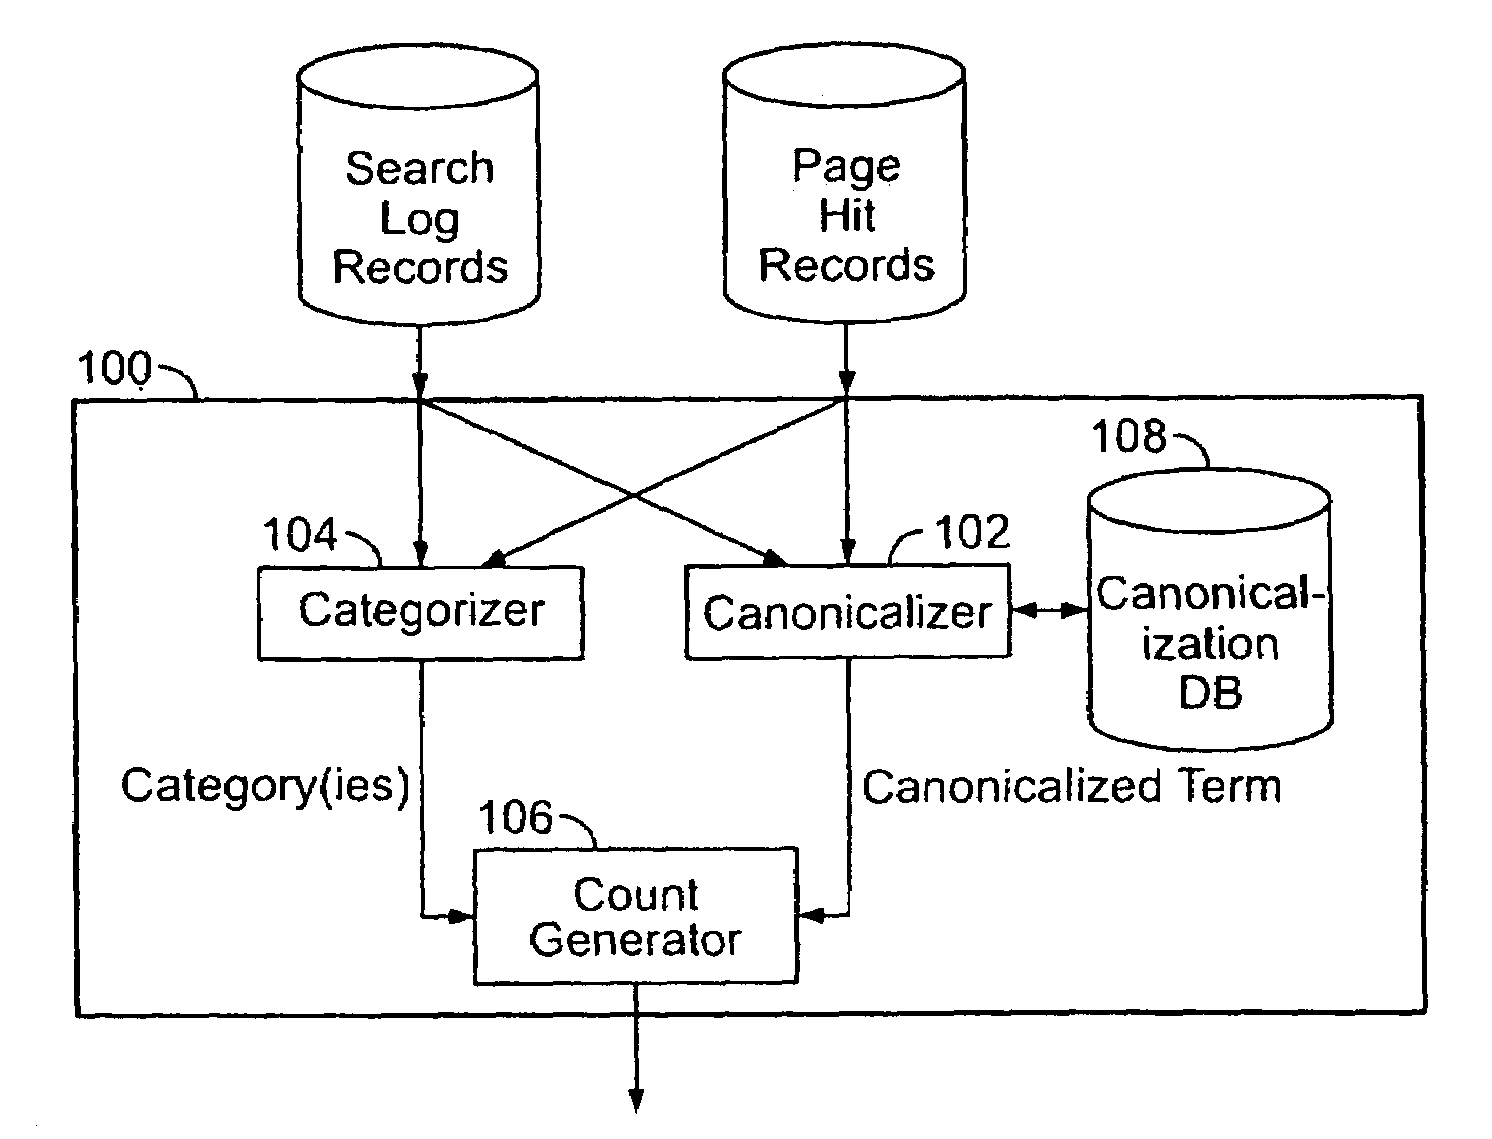 Web site activity monitoring system with tracking by categories and terms